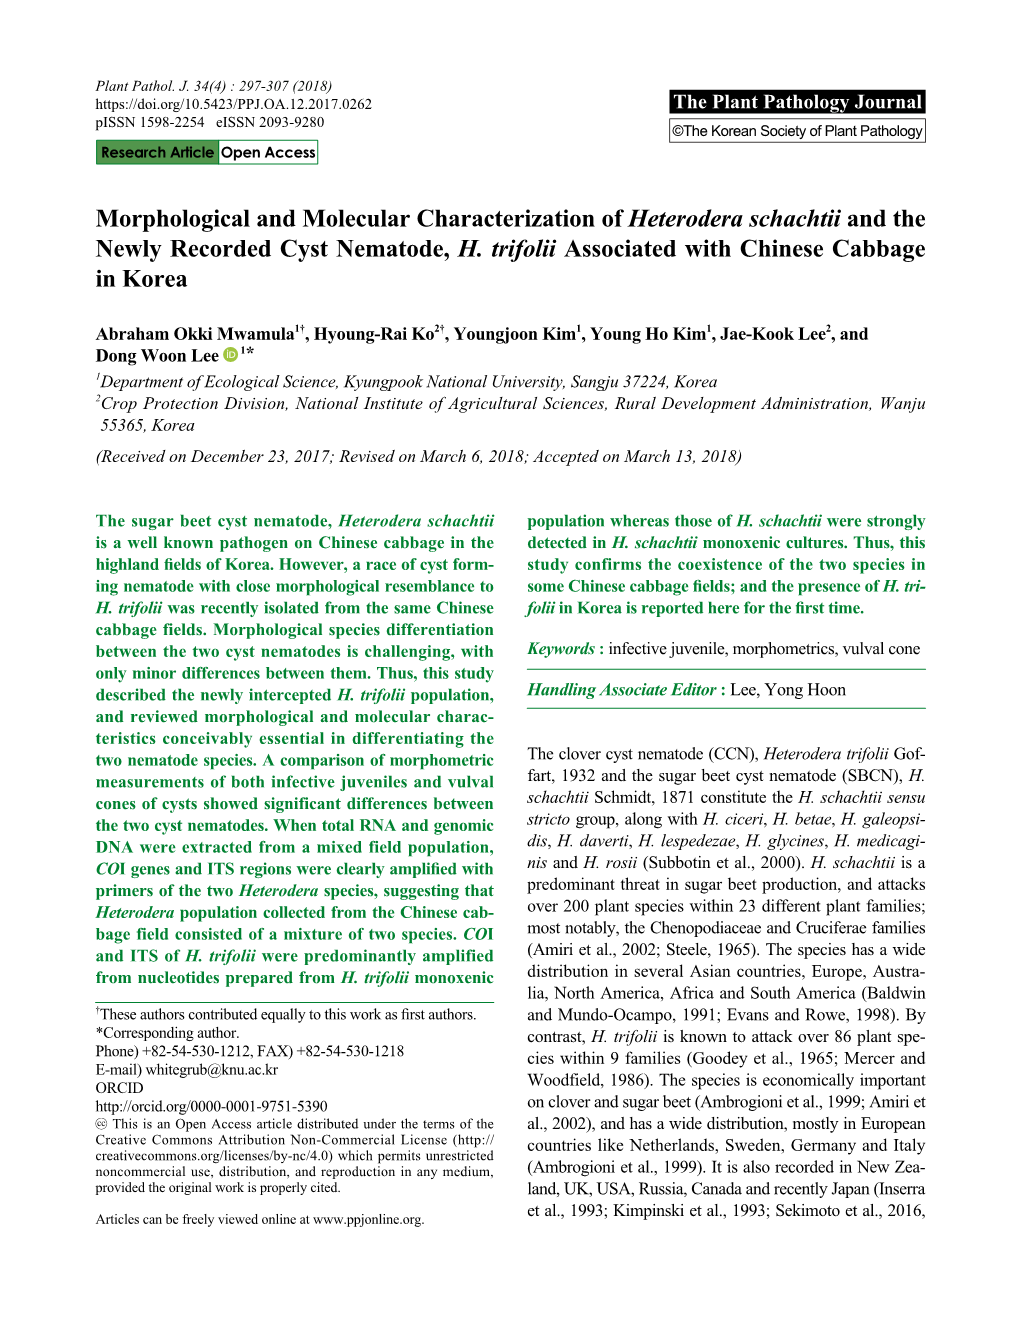 Morphological and Molecular Characterization of Heterodera Schachtii and the Newly Recorded Cyst Nematode, H